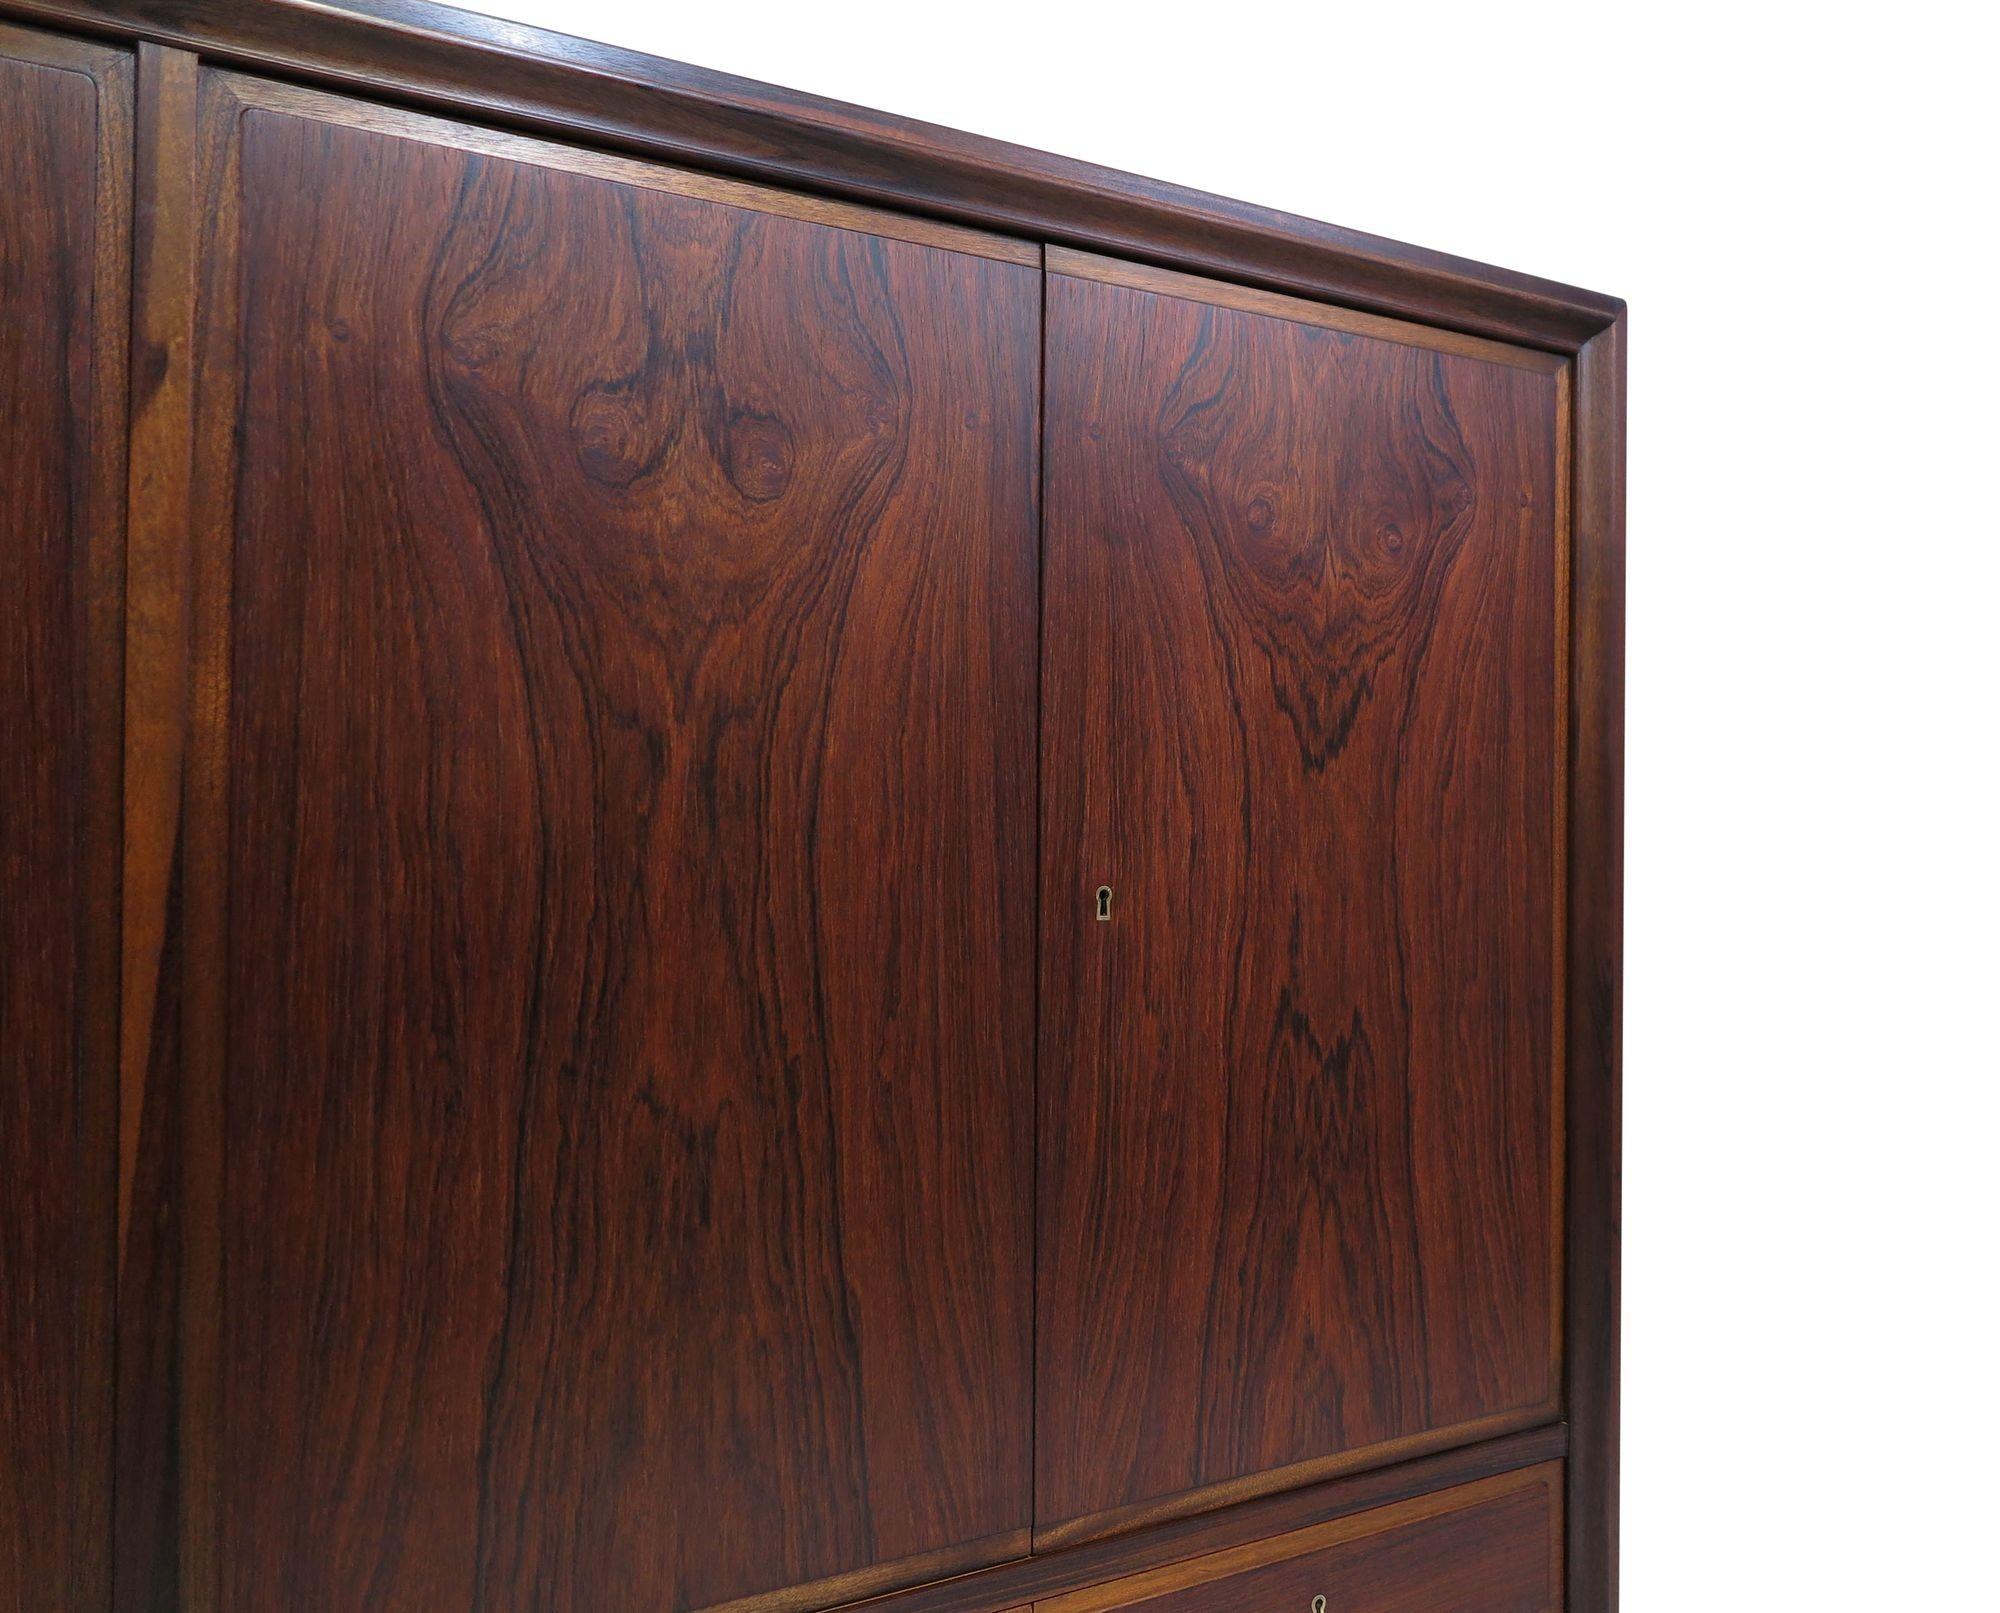 Ole Wanscher Brazilian Rosewood Sideboard In Excellent Condition For Sale In Oakland, CA